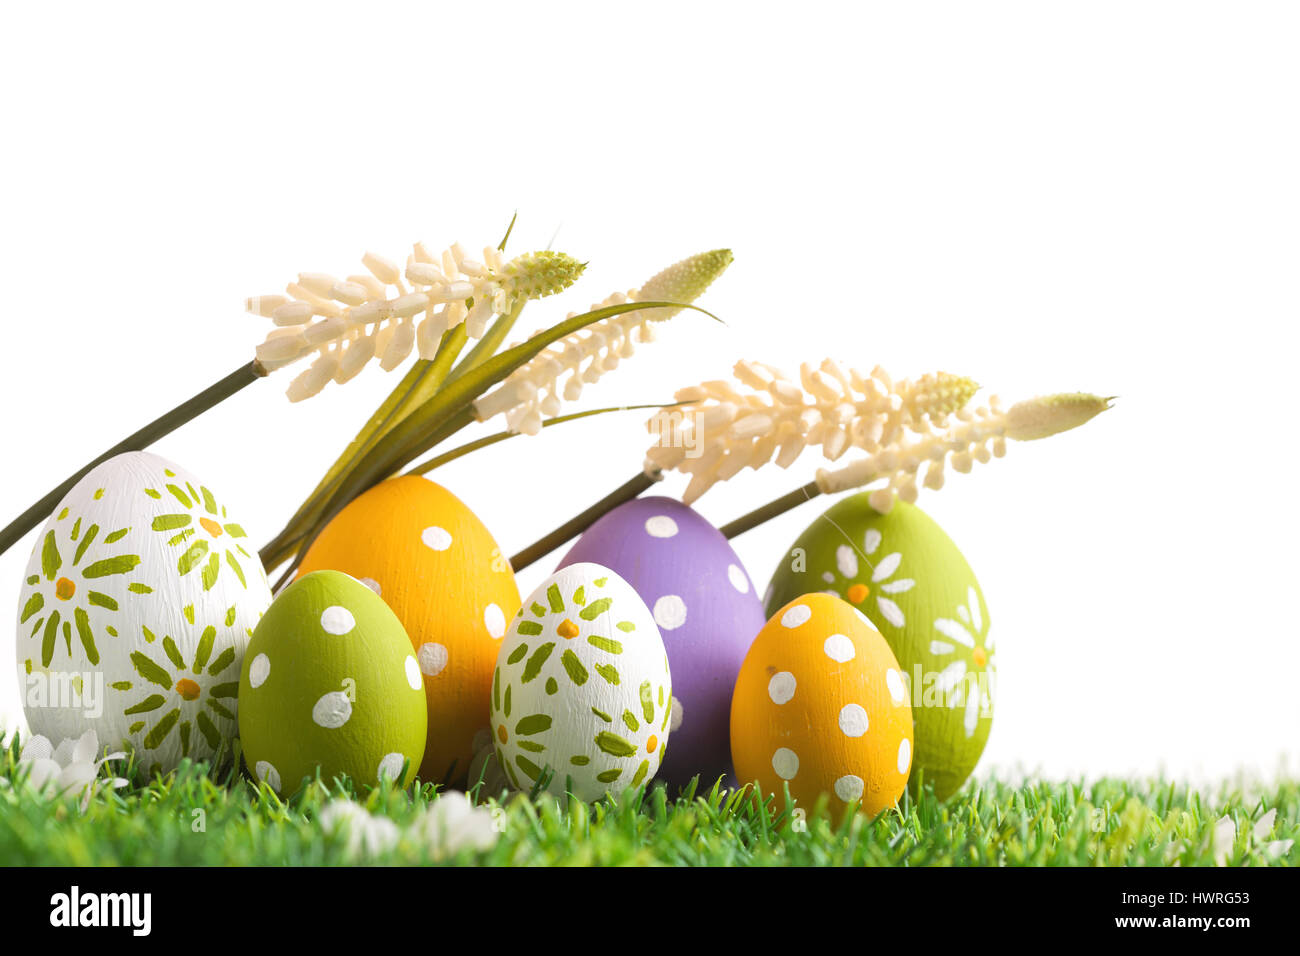 Row of Easter eggs on grass with a white background Stock Photo